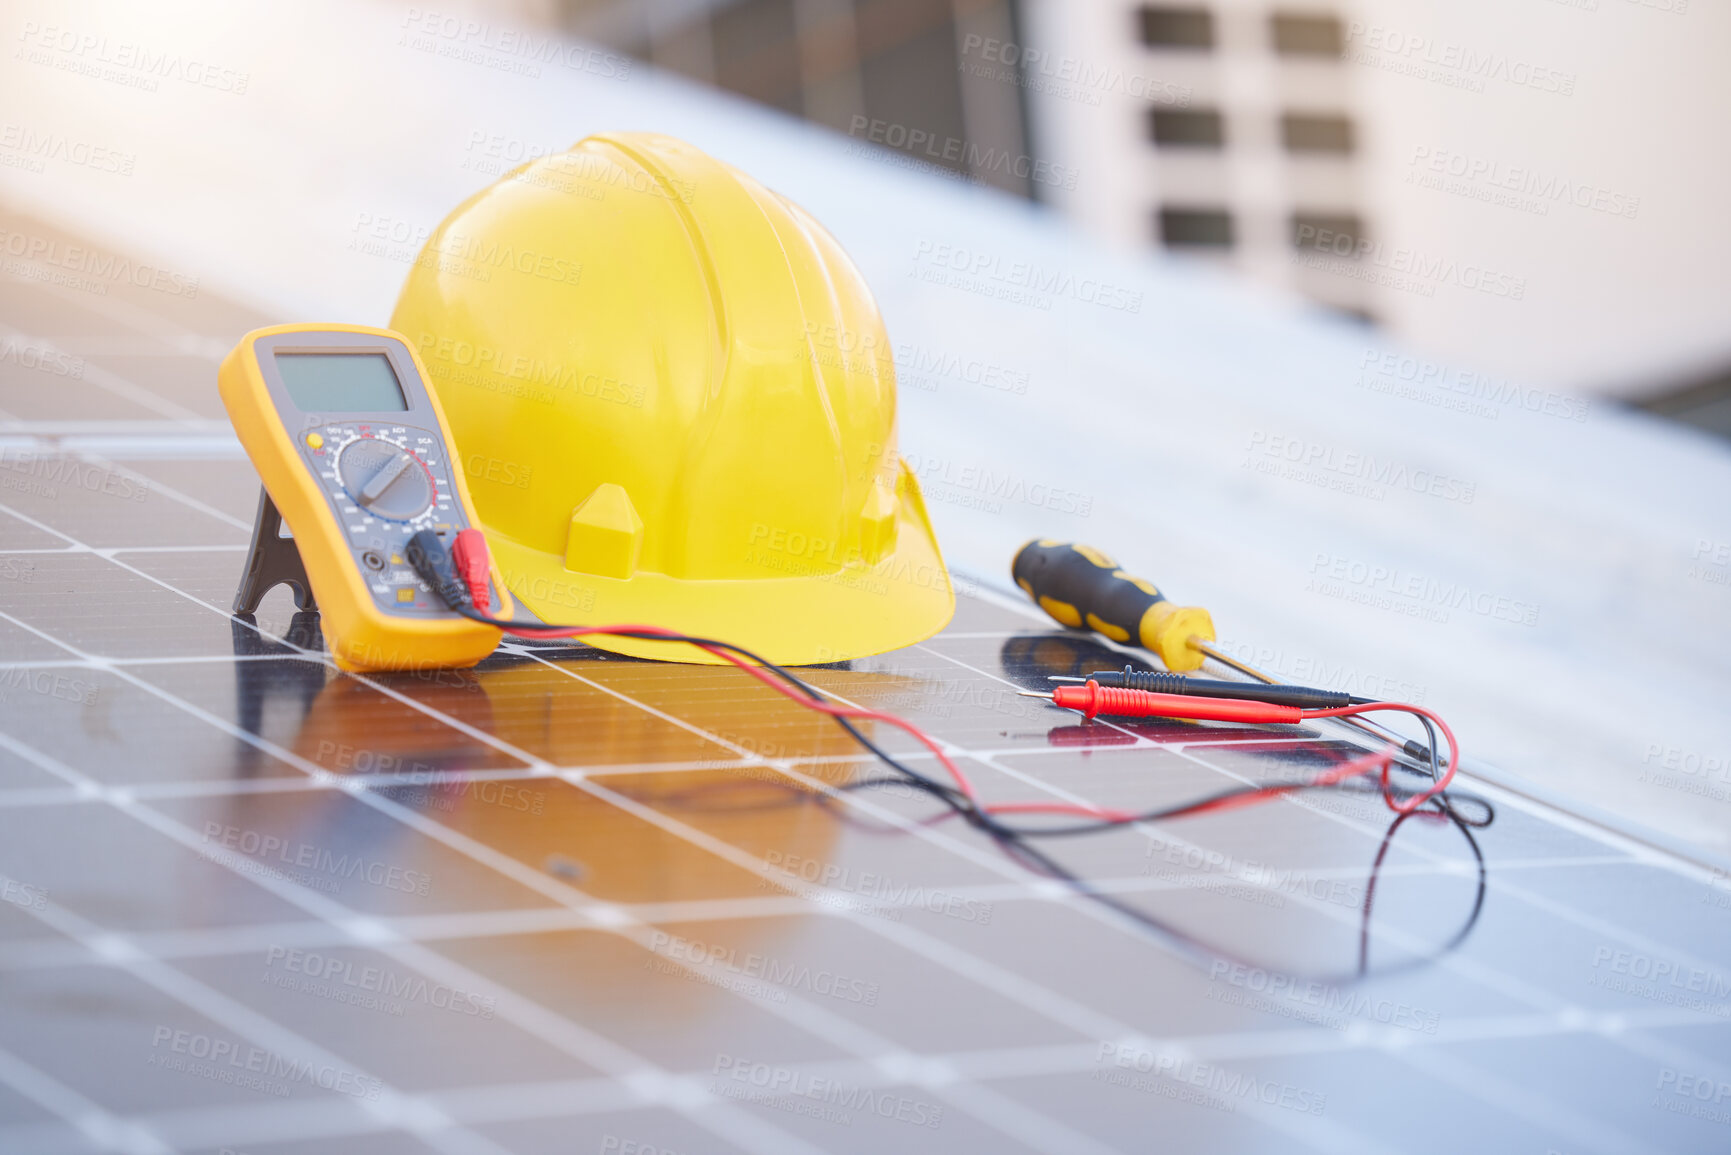 Buy stock photo Tools, solar panels or helmet on roof for solar energy installation in a city development project. Voltmeter, Construction, renewable energy or electric engineering equipment for building maintenance